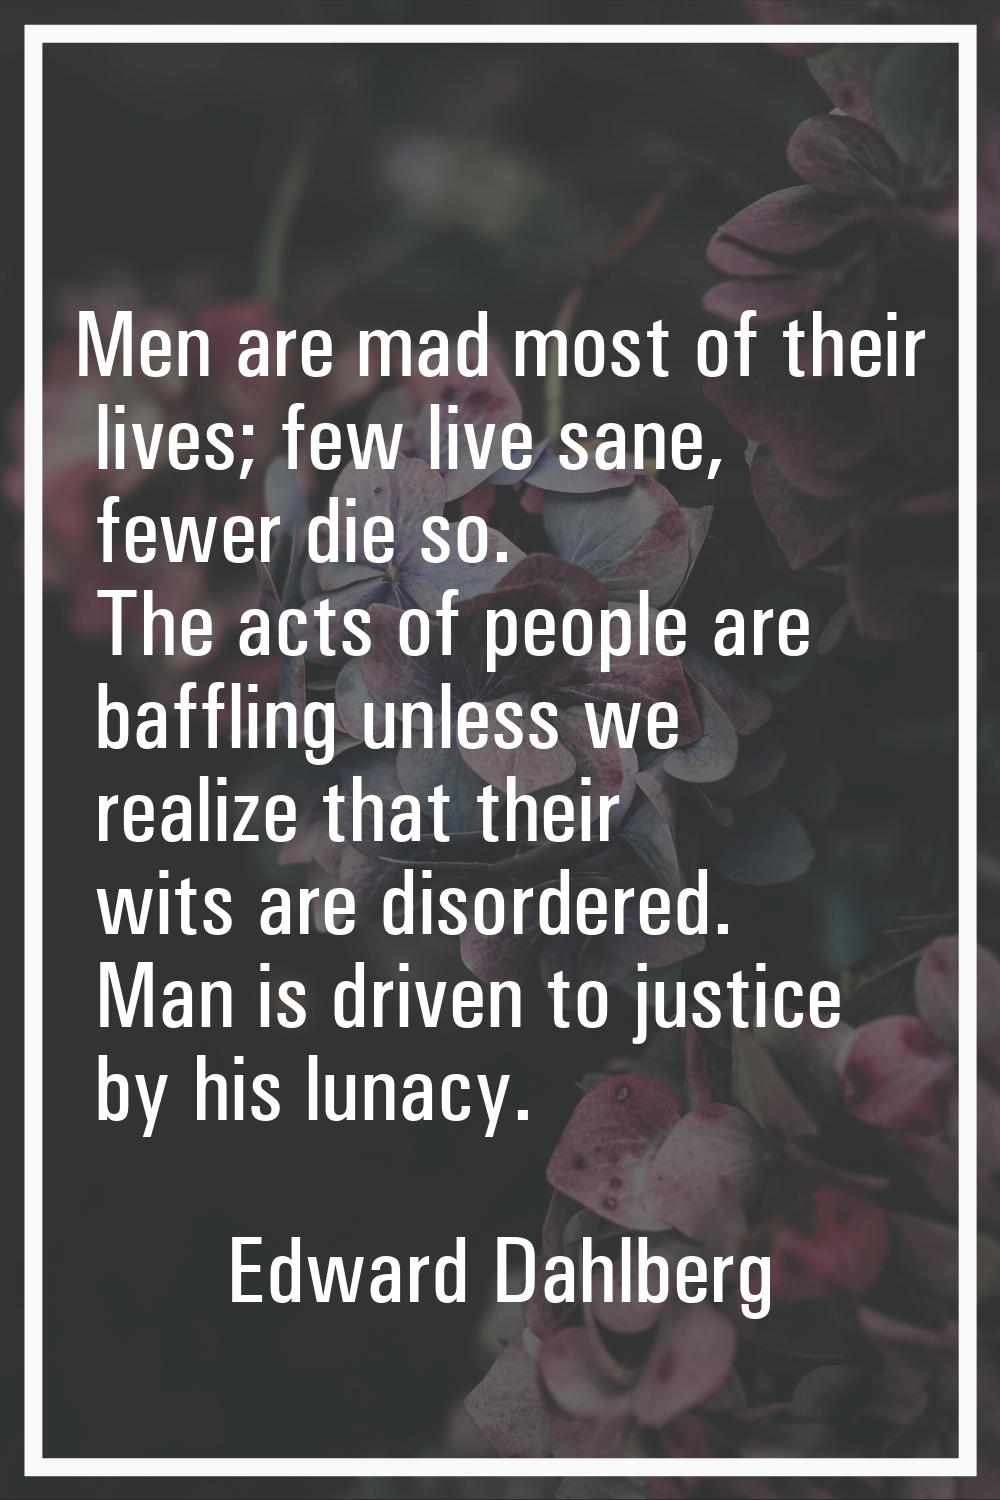 Men are mad most of their lives; few live sane, fewer die so. The acts of people are baffling unles